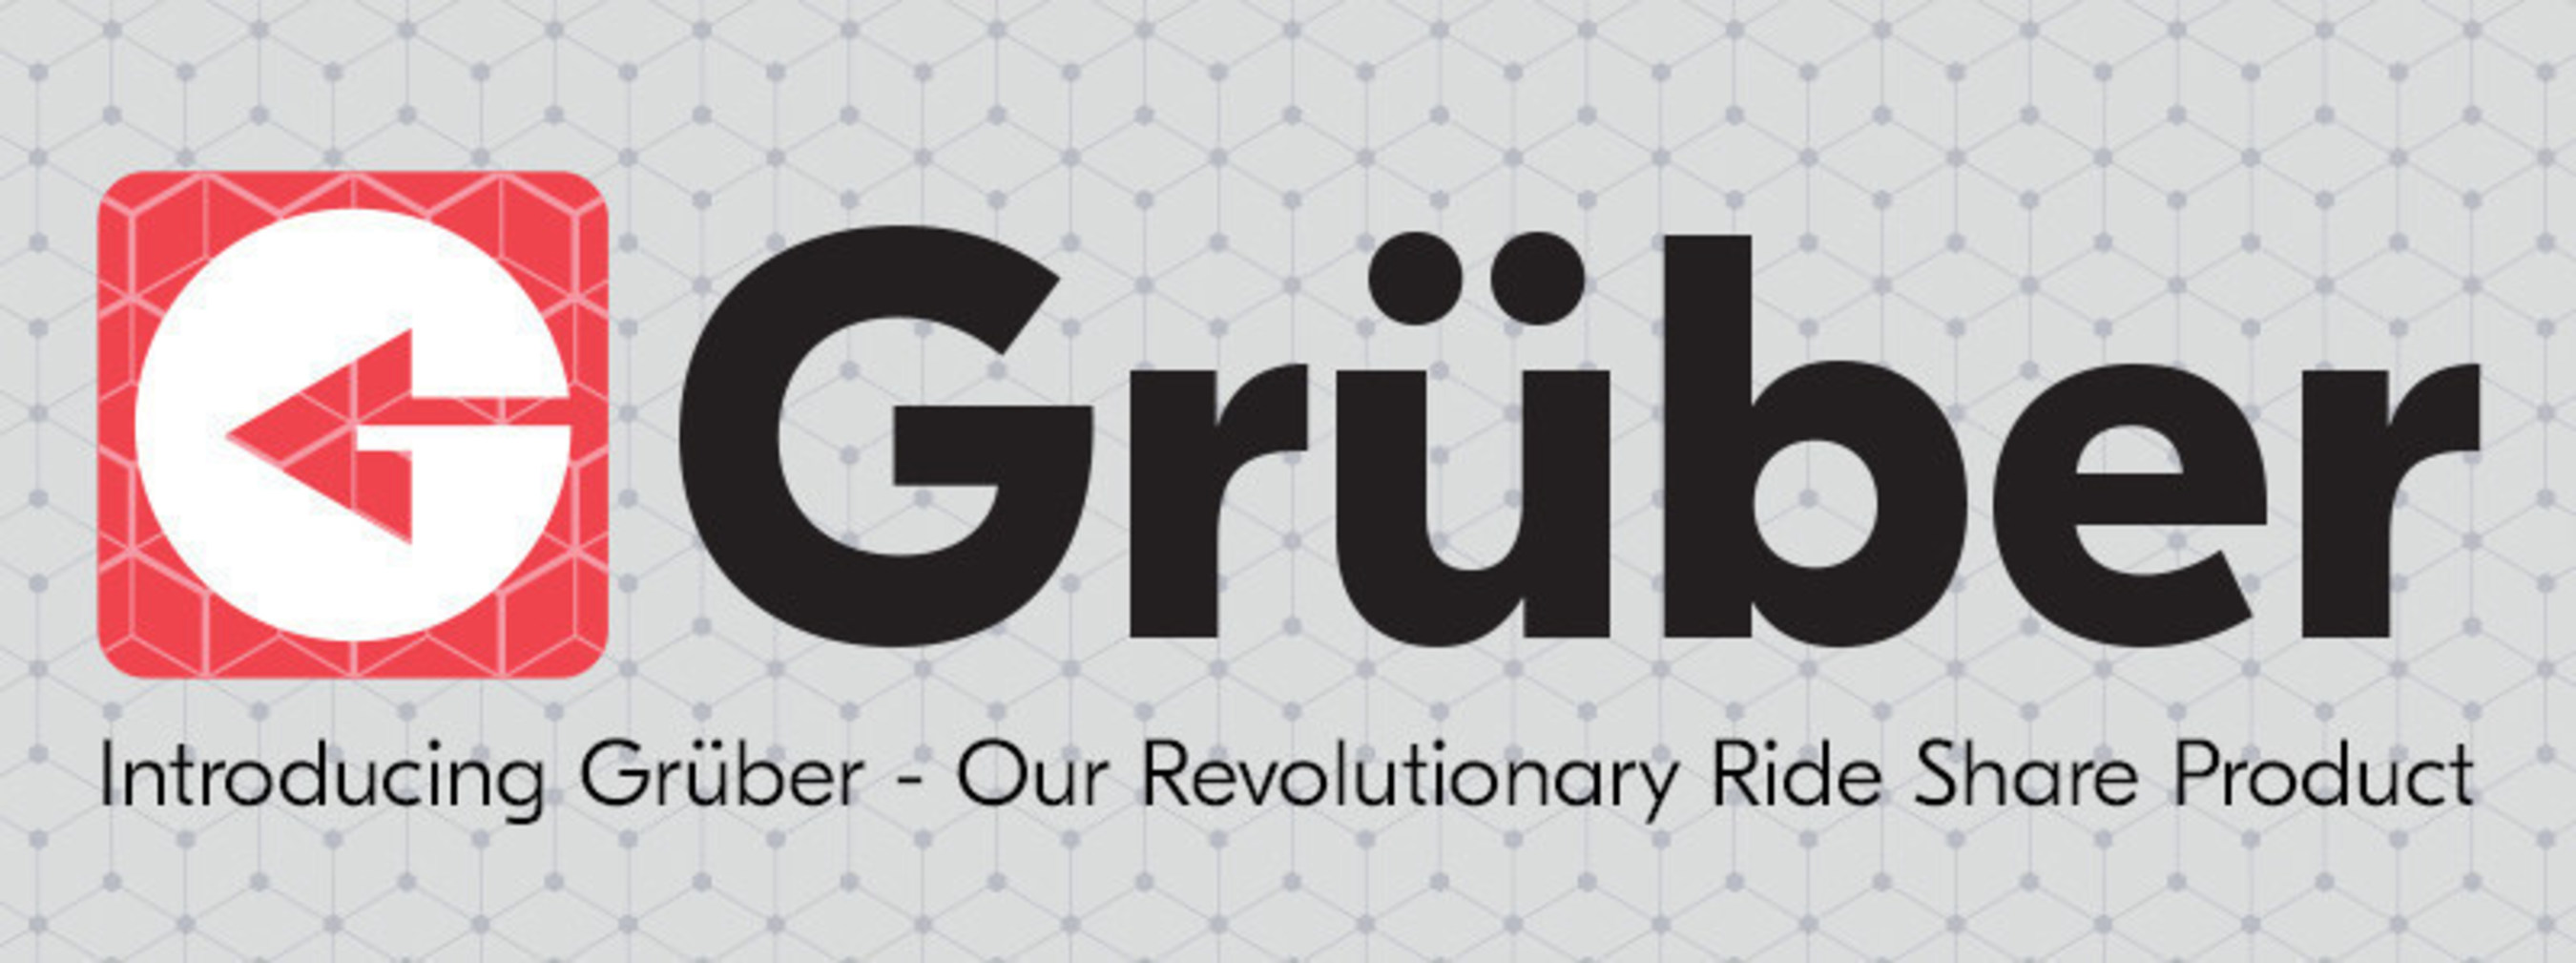 Gruber, Grubhub's latest product extension, allows people who love both the smell of food and new cars, and the delight of a car showing up the moment they need transportation, to hitch a ride with Grubhub's restaurant delivery drivers.